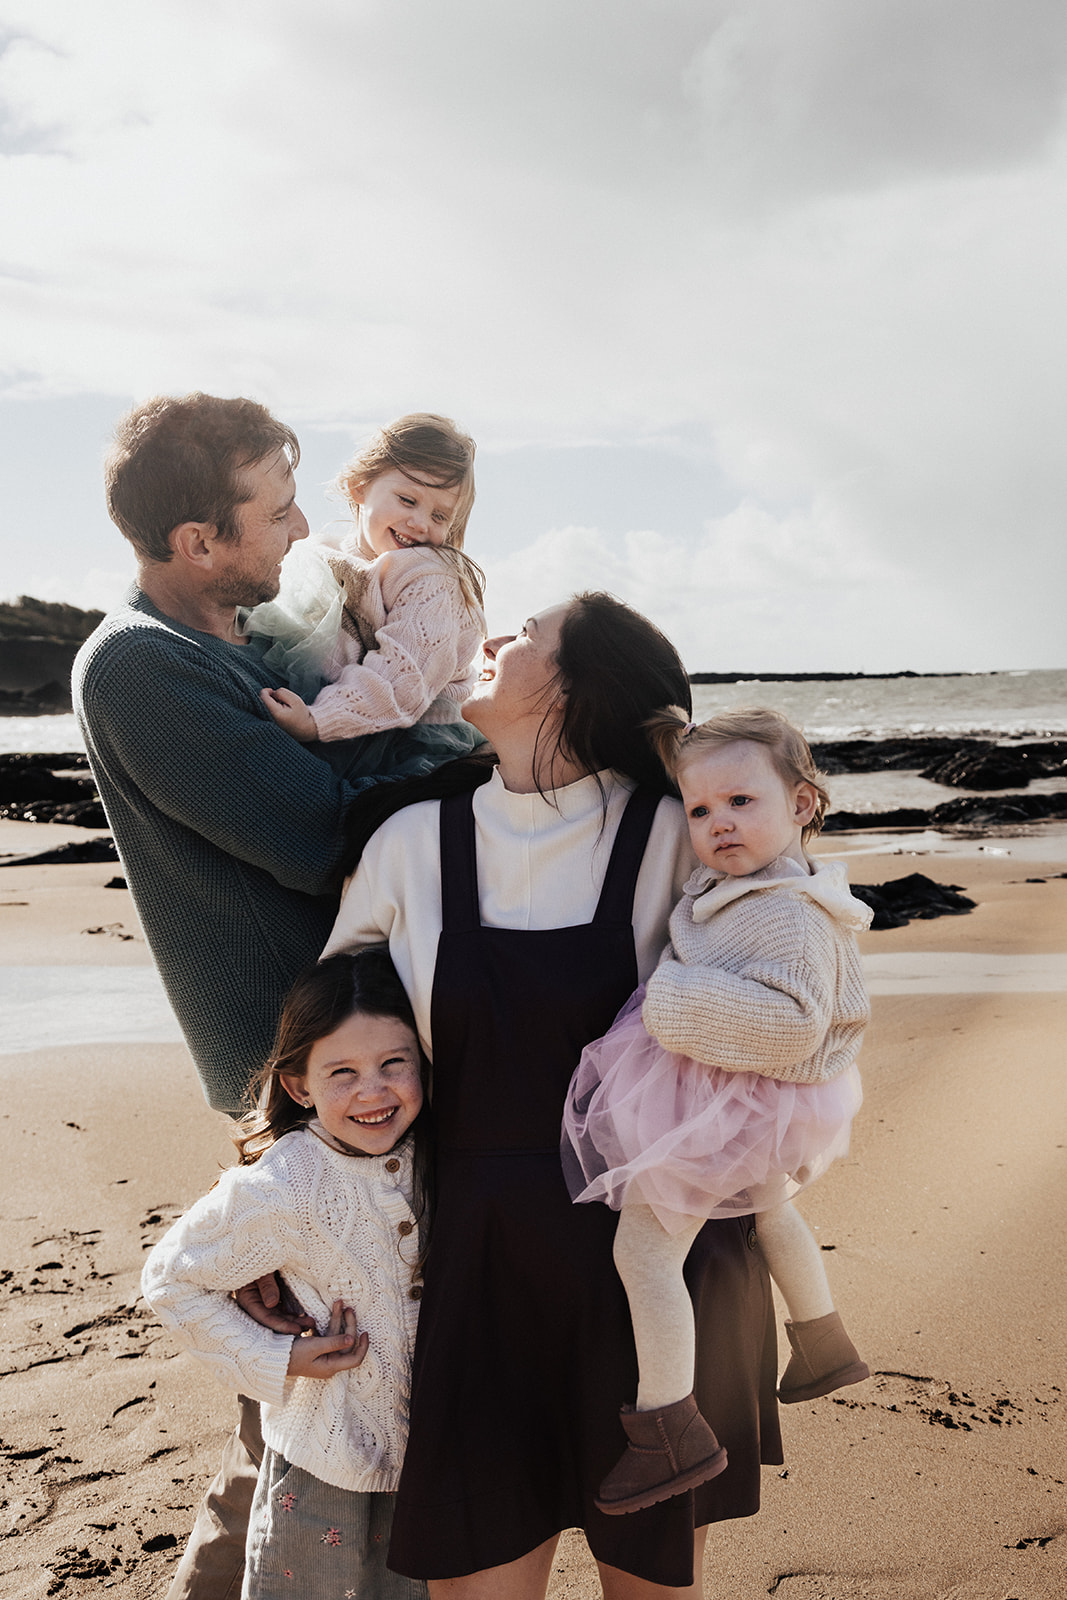 Candid family photography at Bovisand beach in Devon